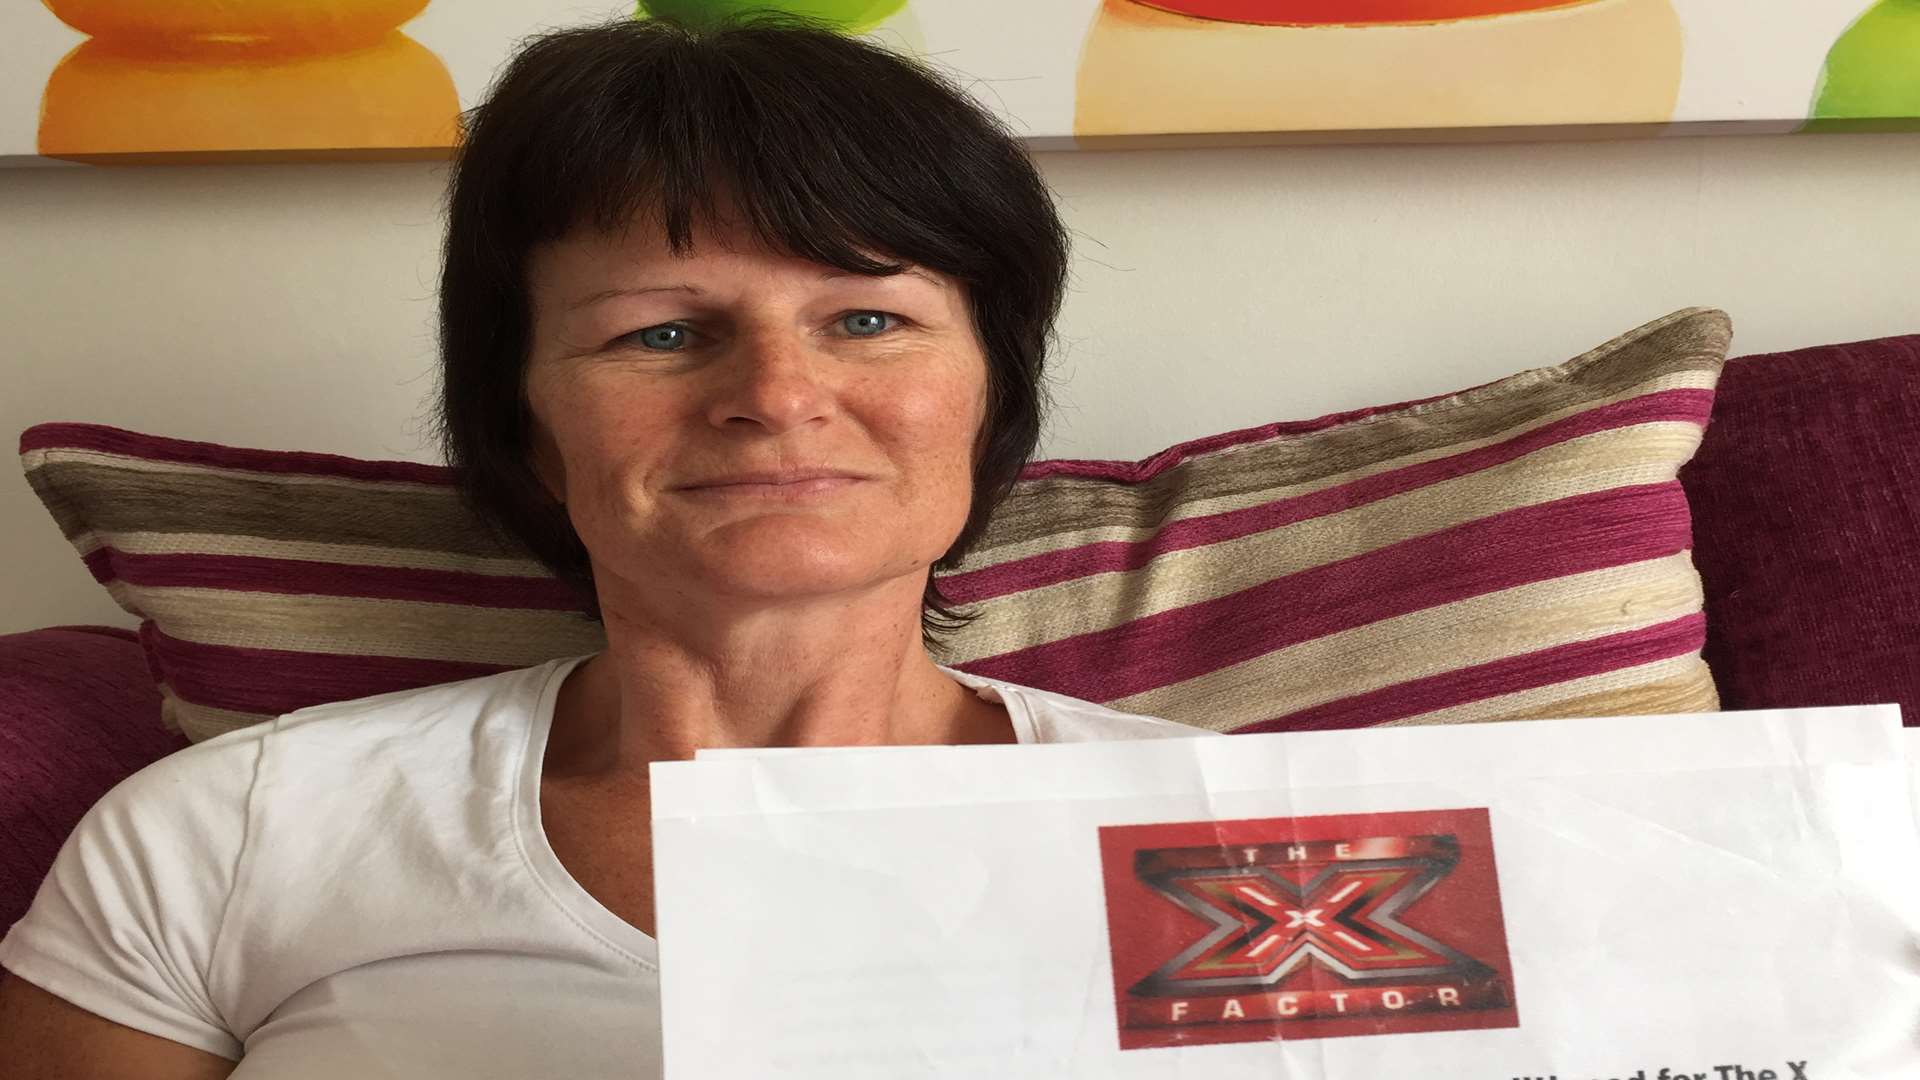 Shaz Paz with one of her X Factor letters